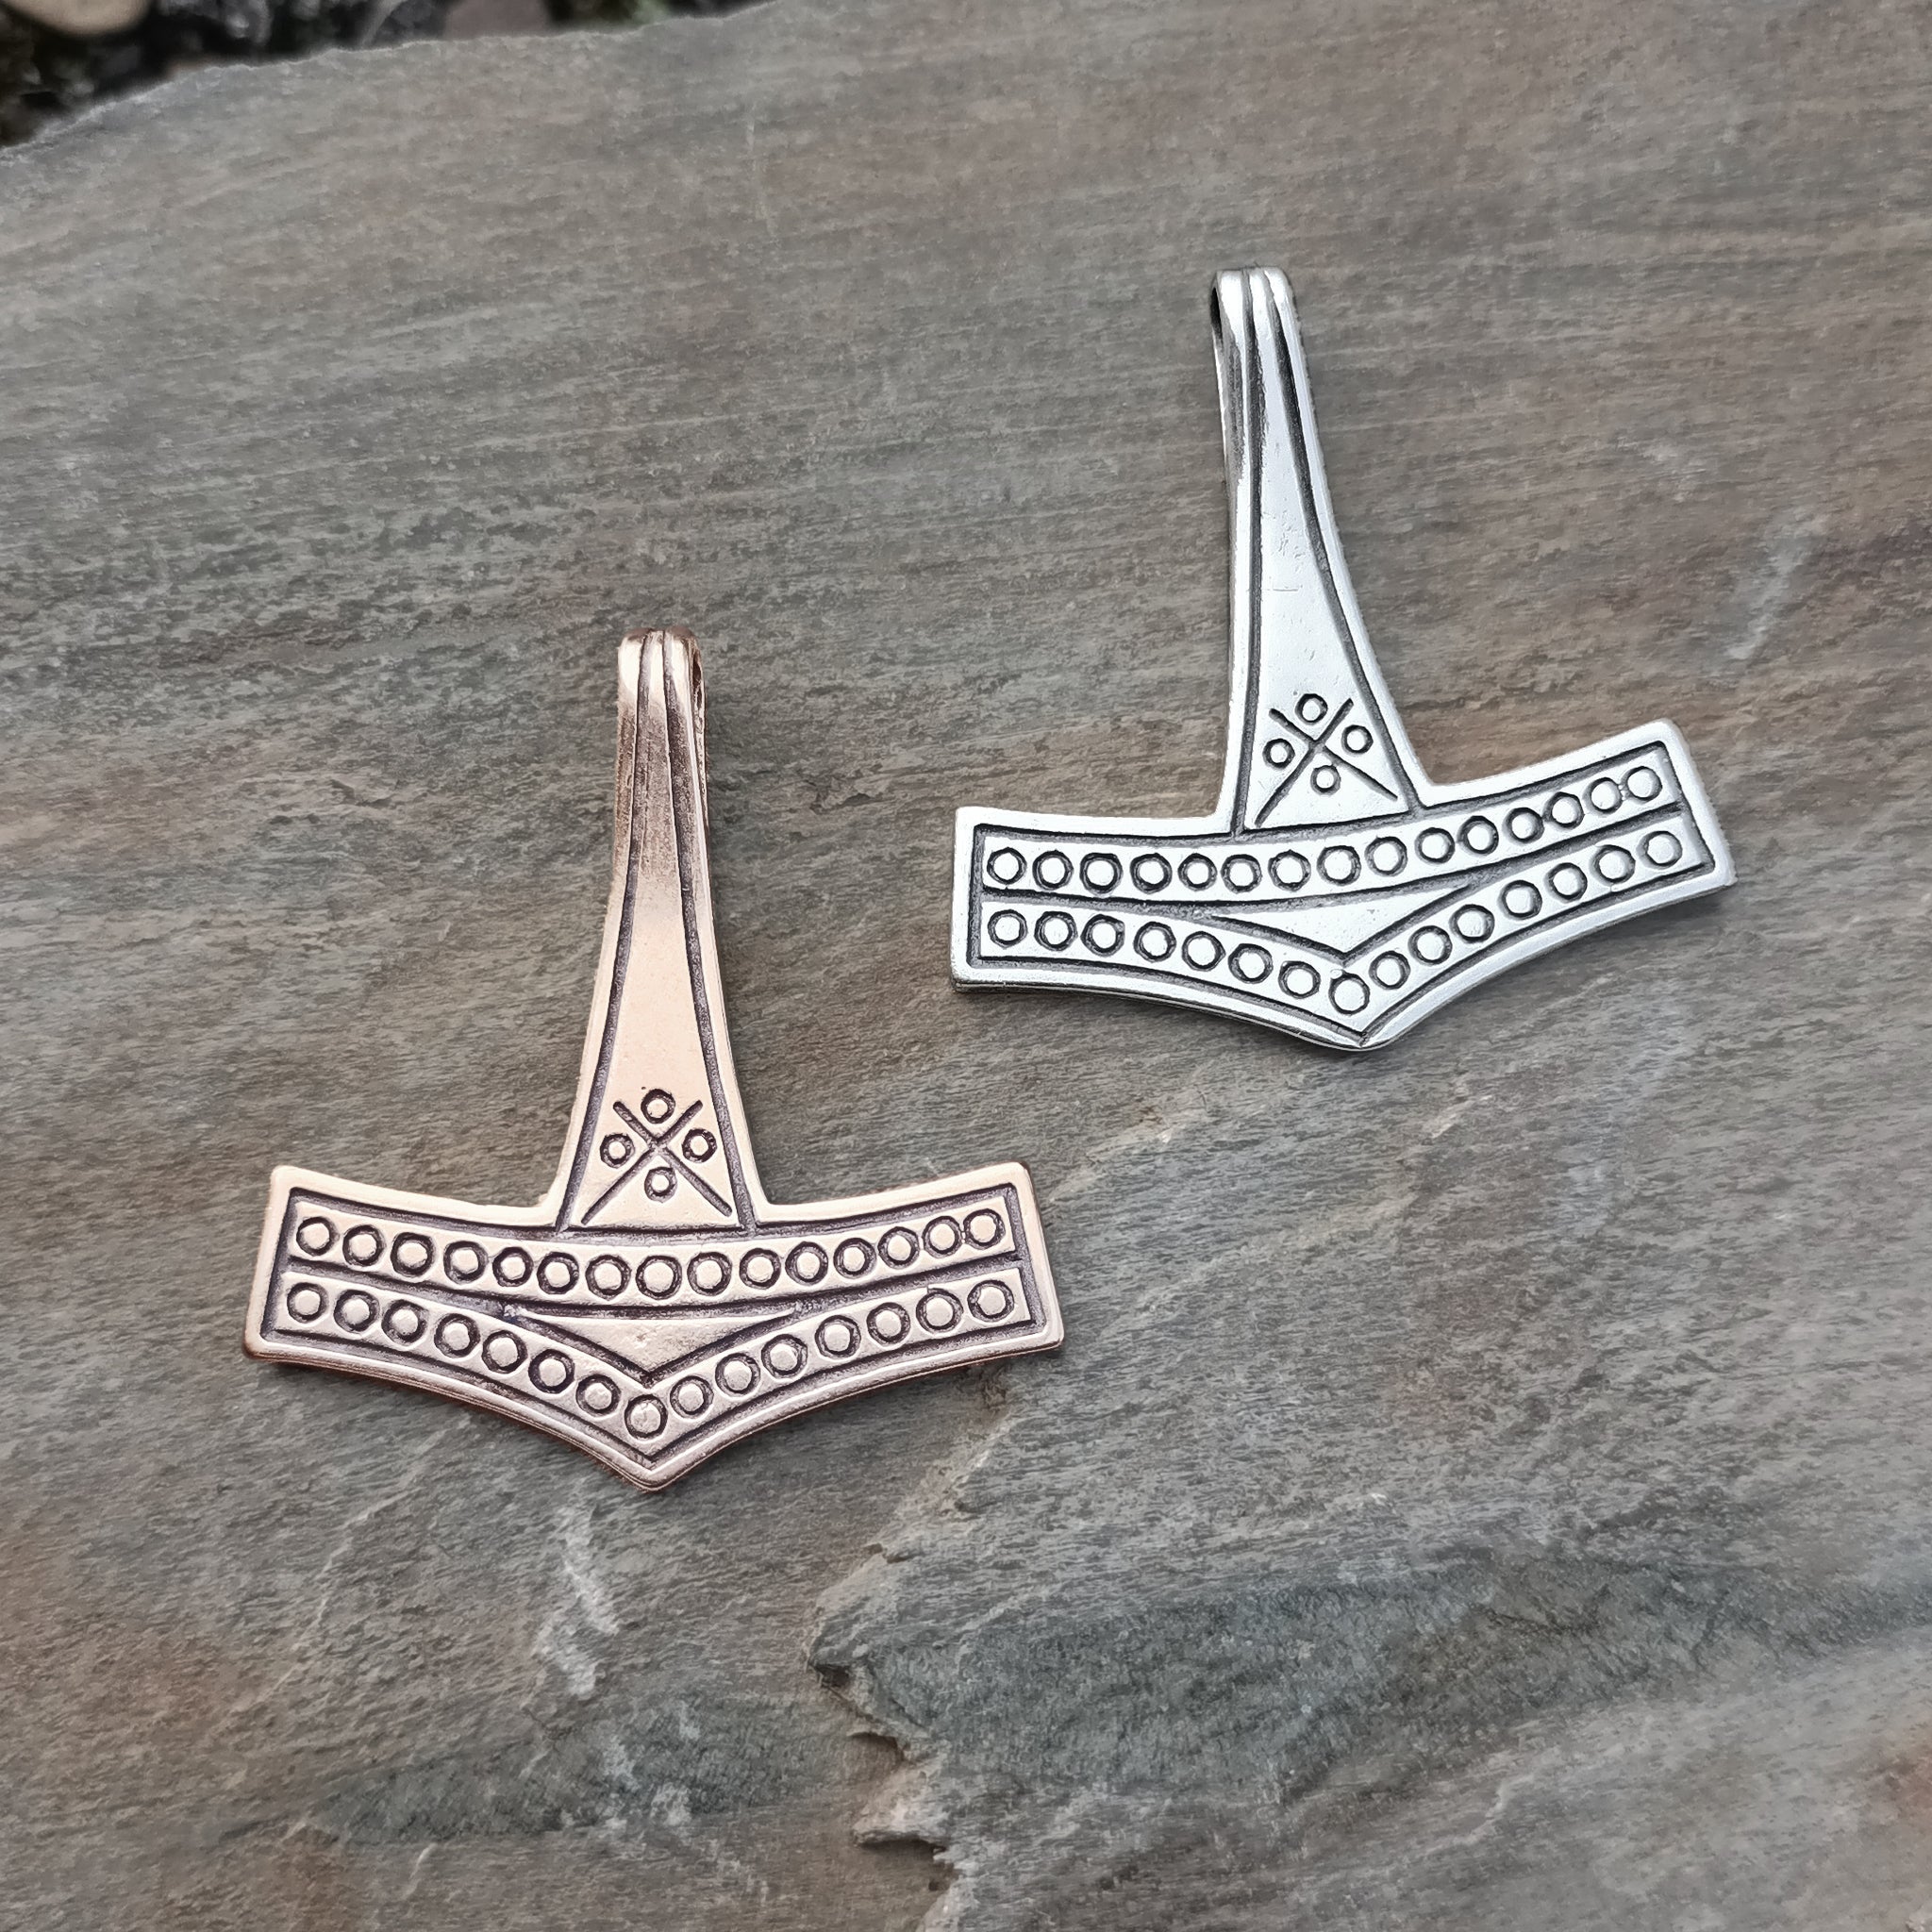 Large Rømersdal Replica Thors Hammer Pendants on Rock - Bronze and Silver